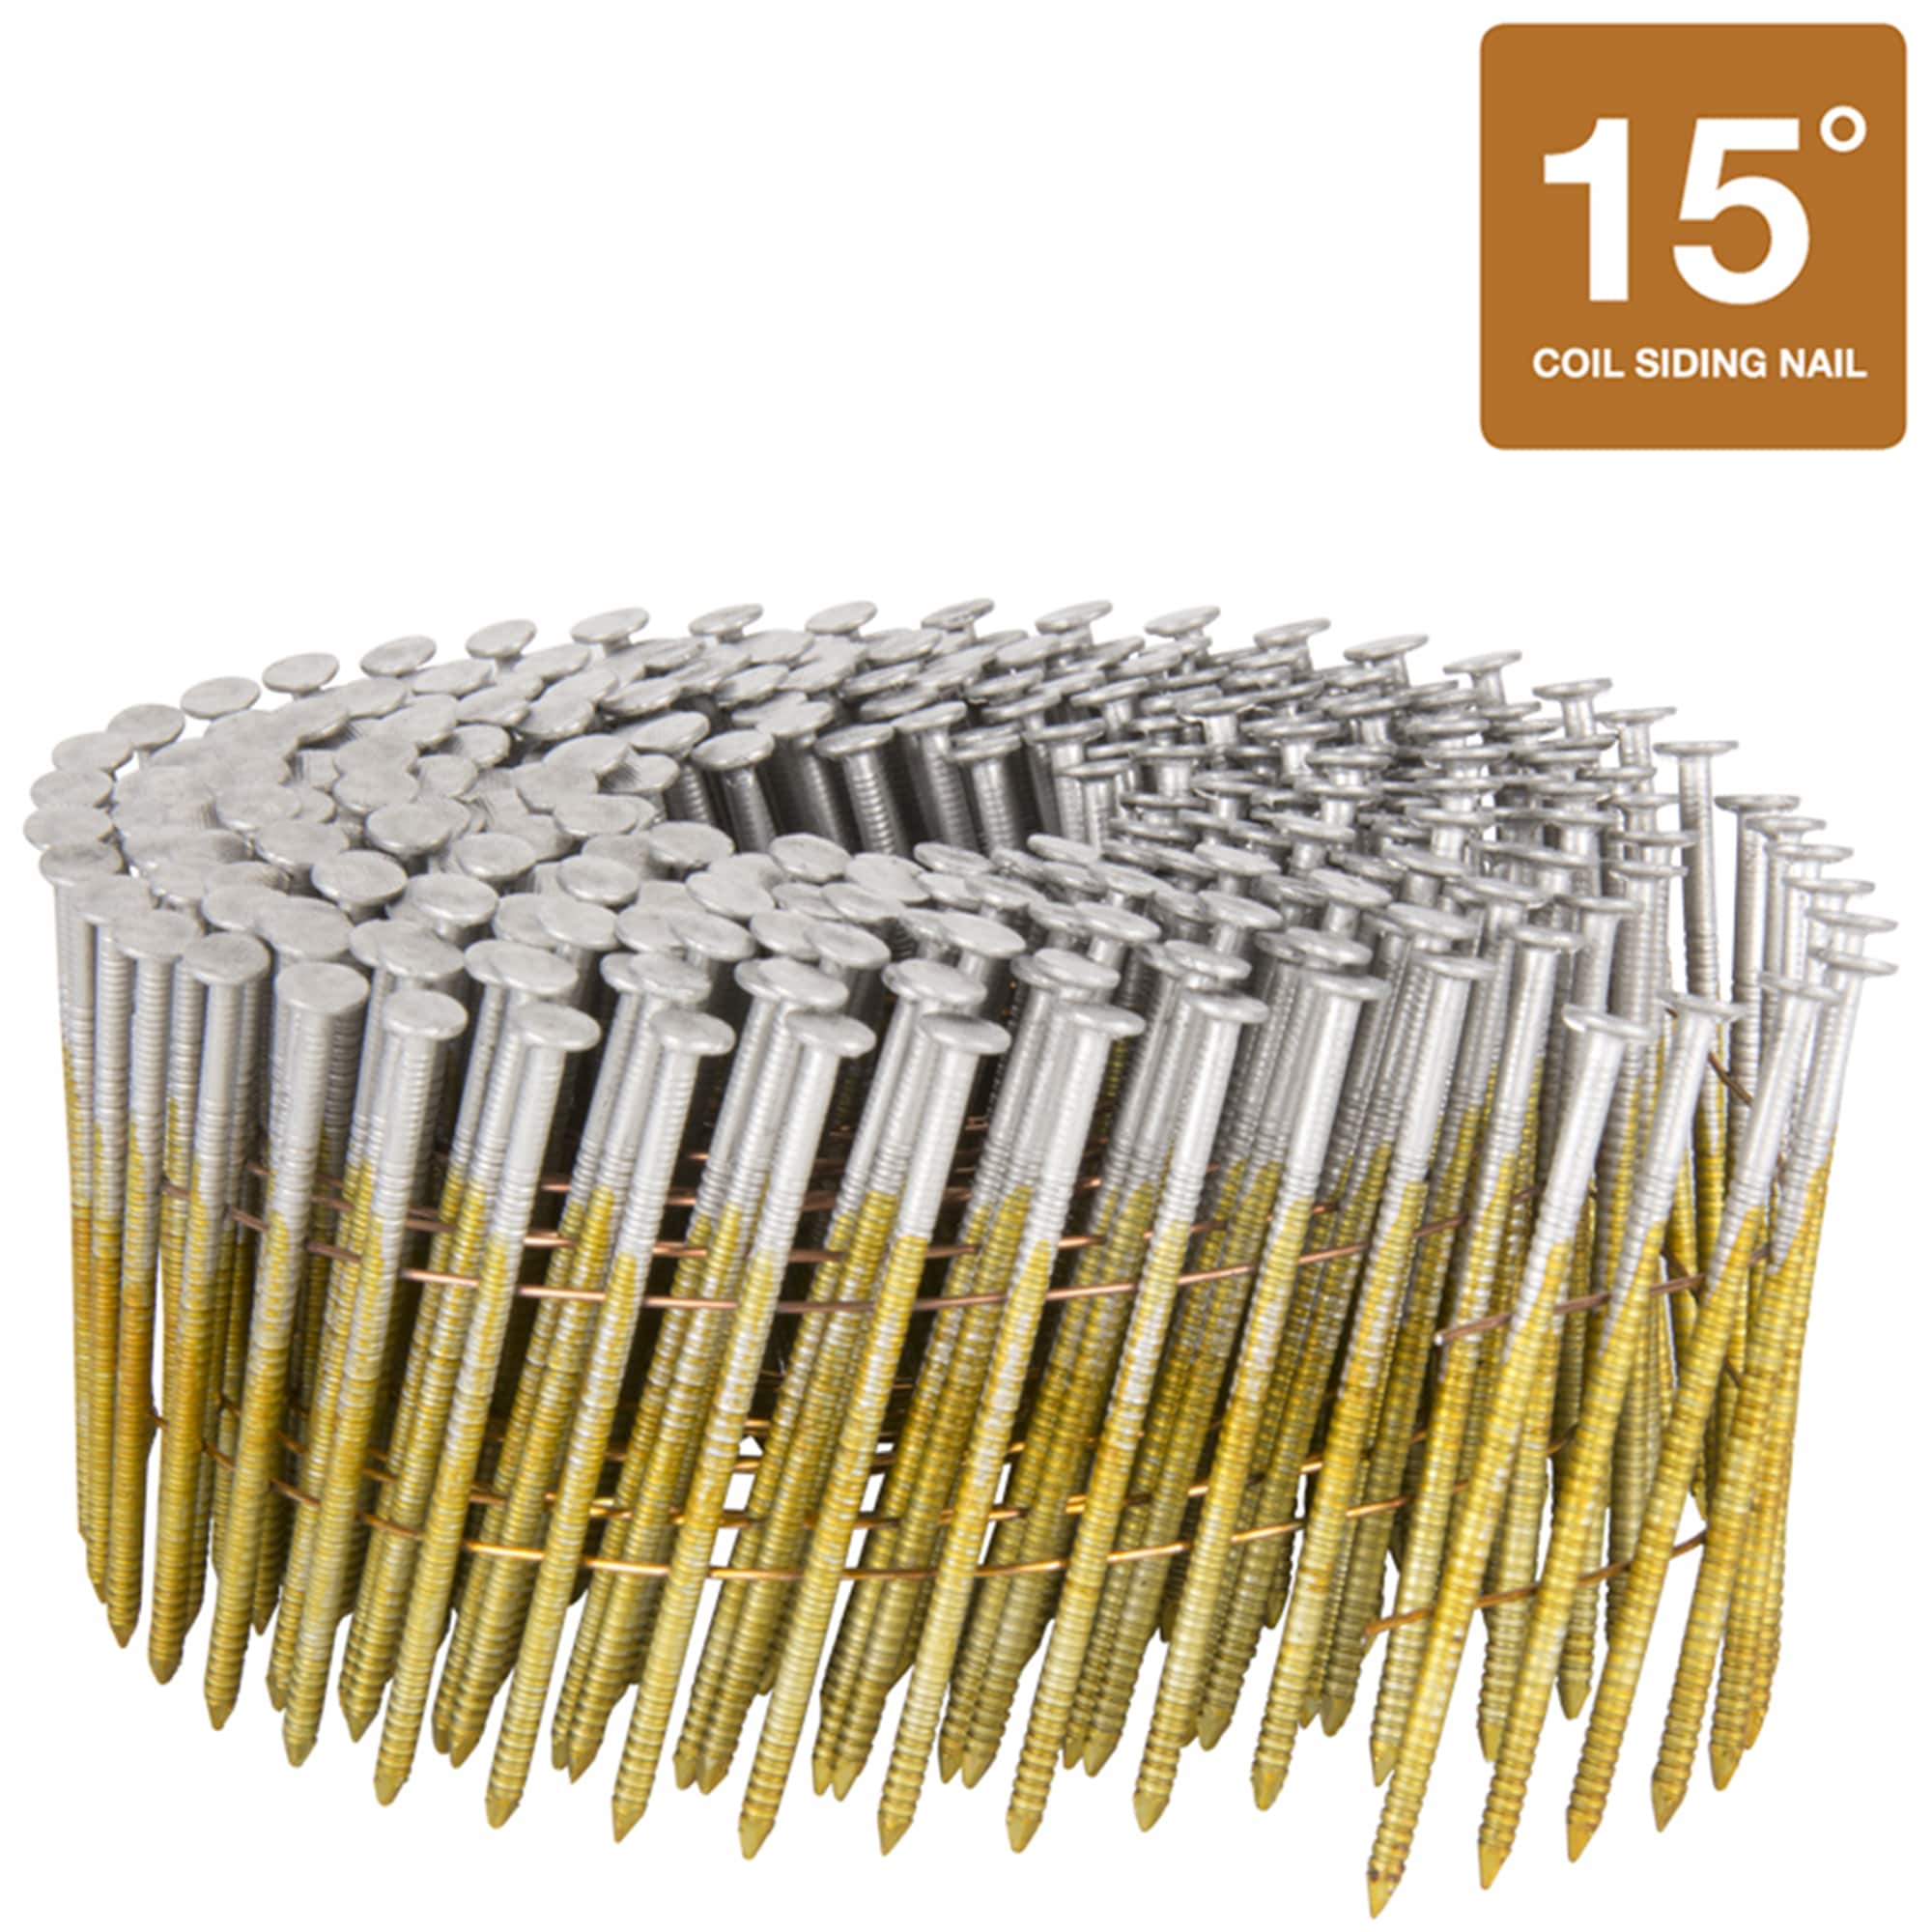 Metabo HPT 2-in 16-Gauge Siding Nails (900-Per Box) in the